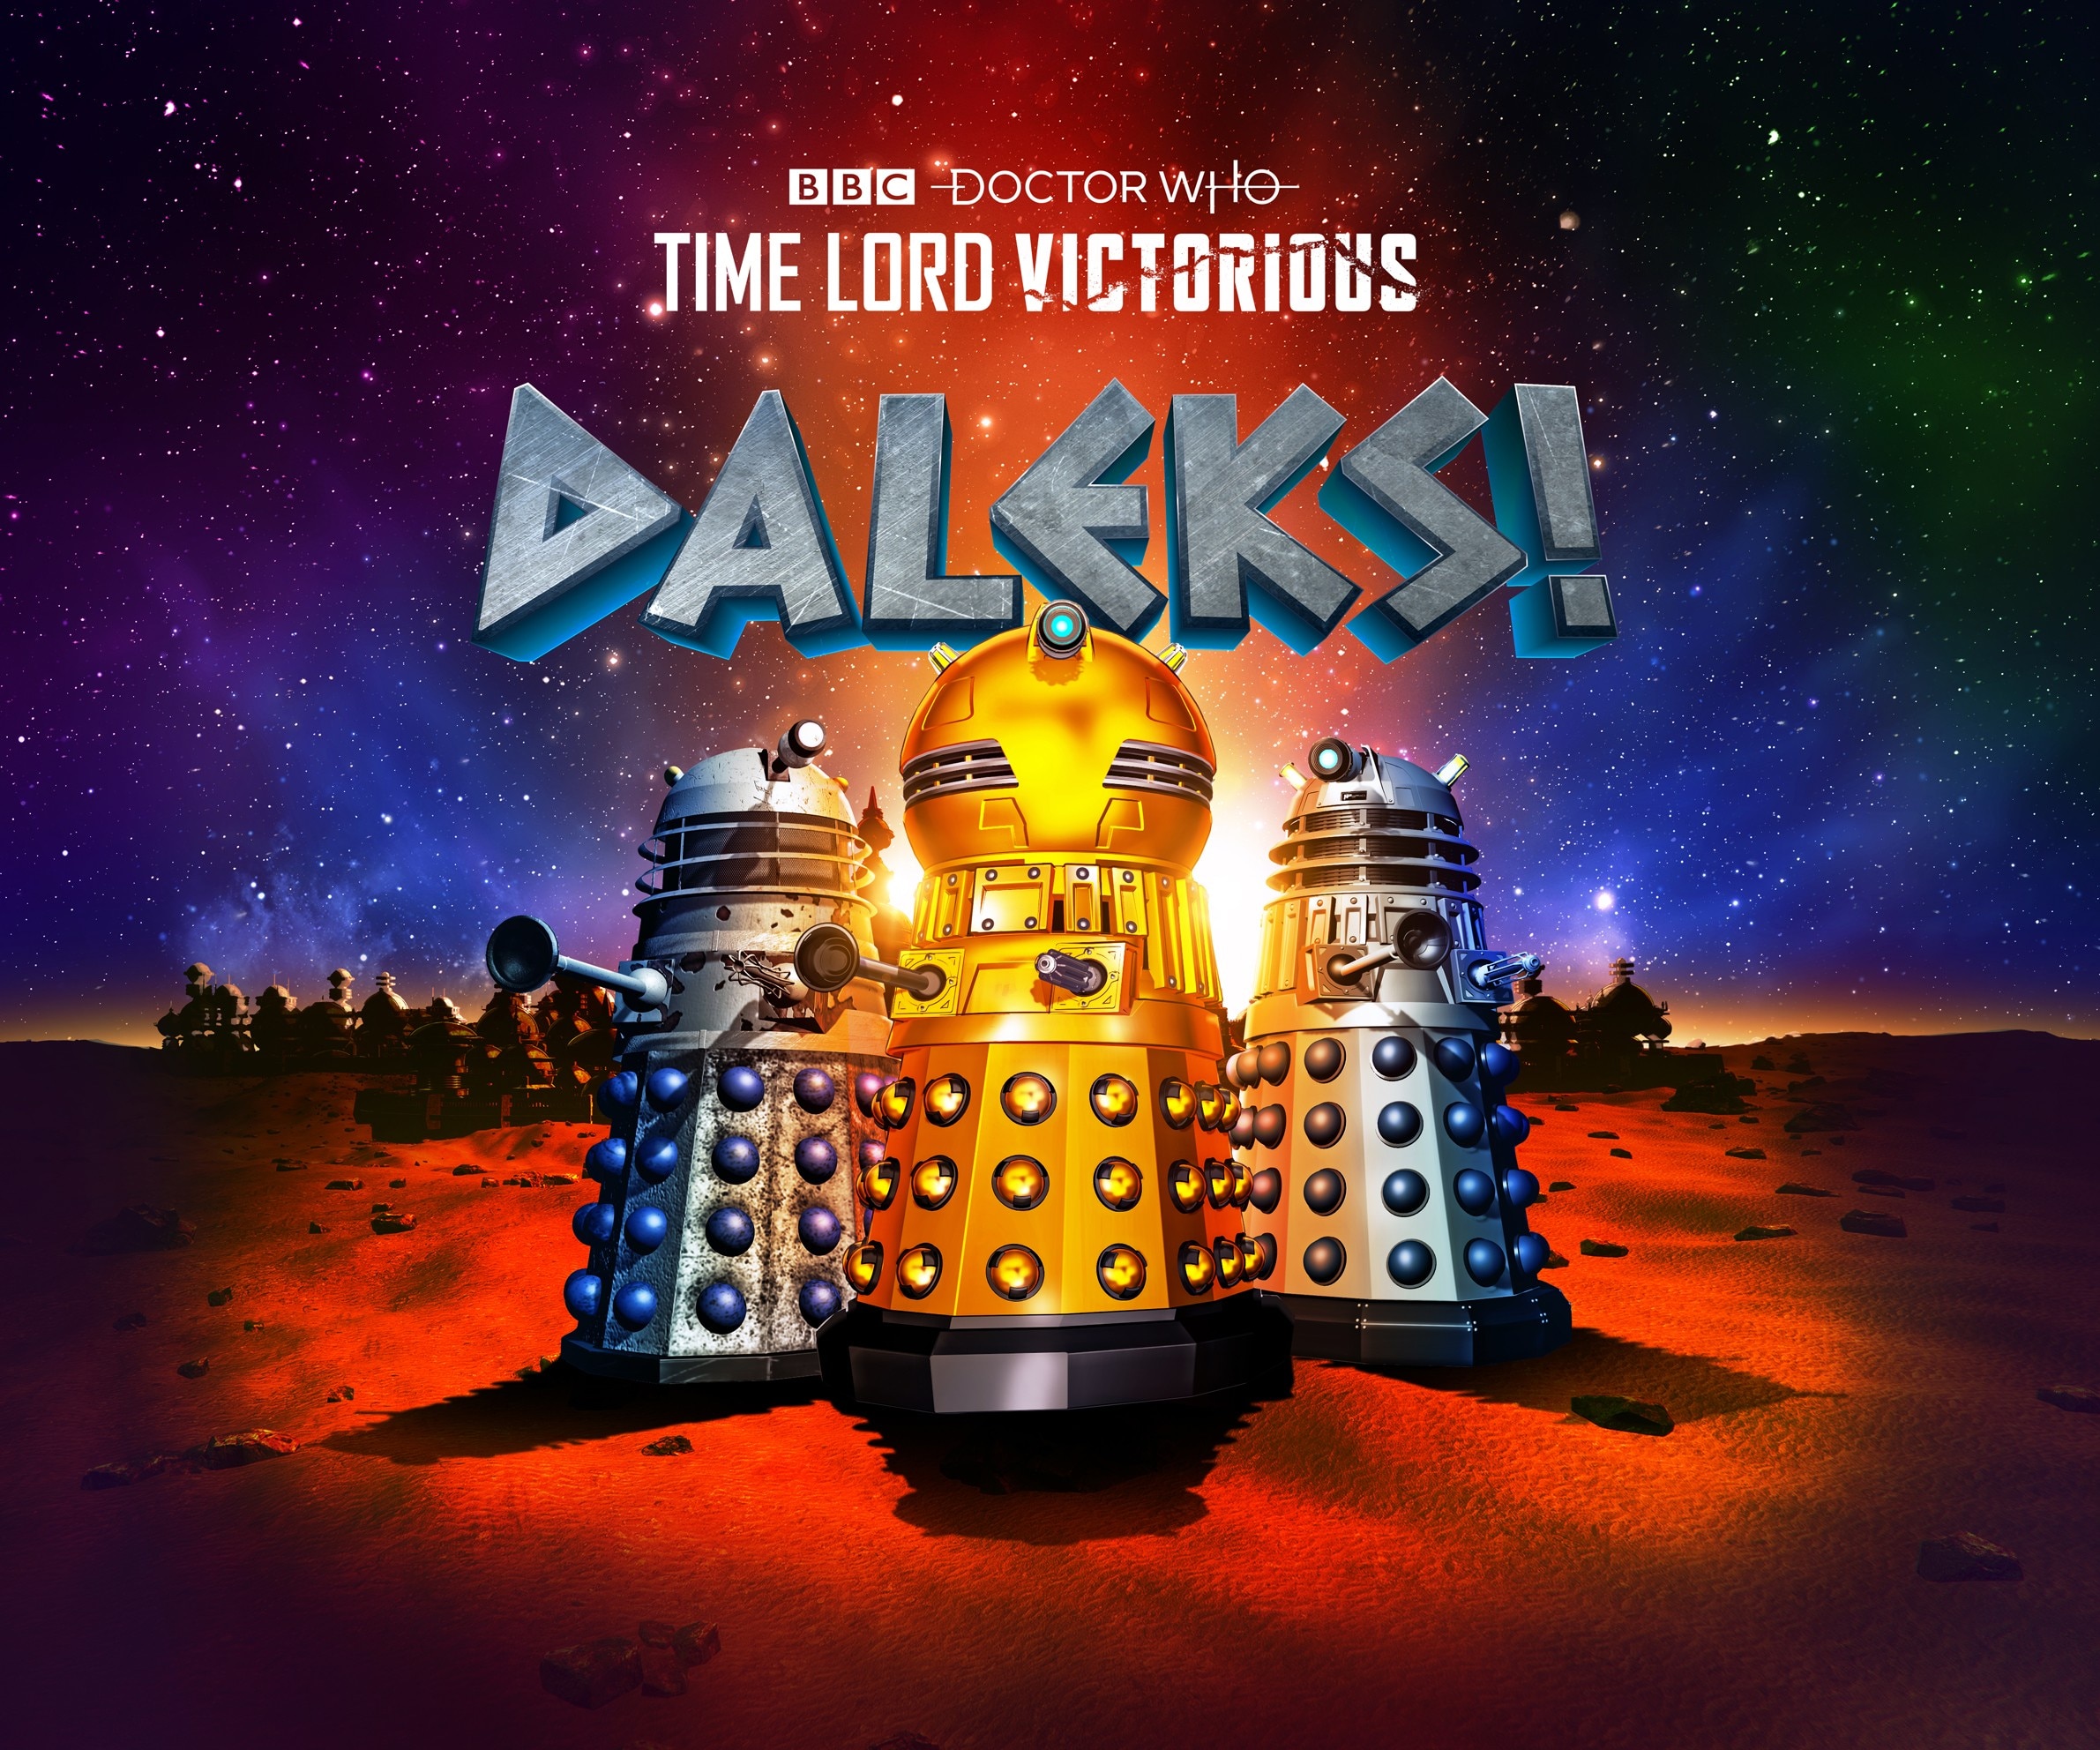 DOCTOR WHO 10: TIME LORD VICTORIOUS – DIFENSORE DEI DALEK